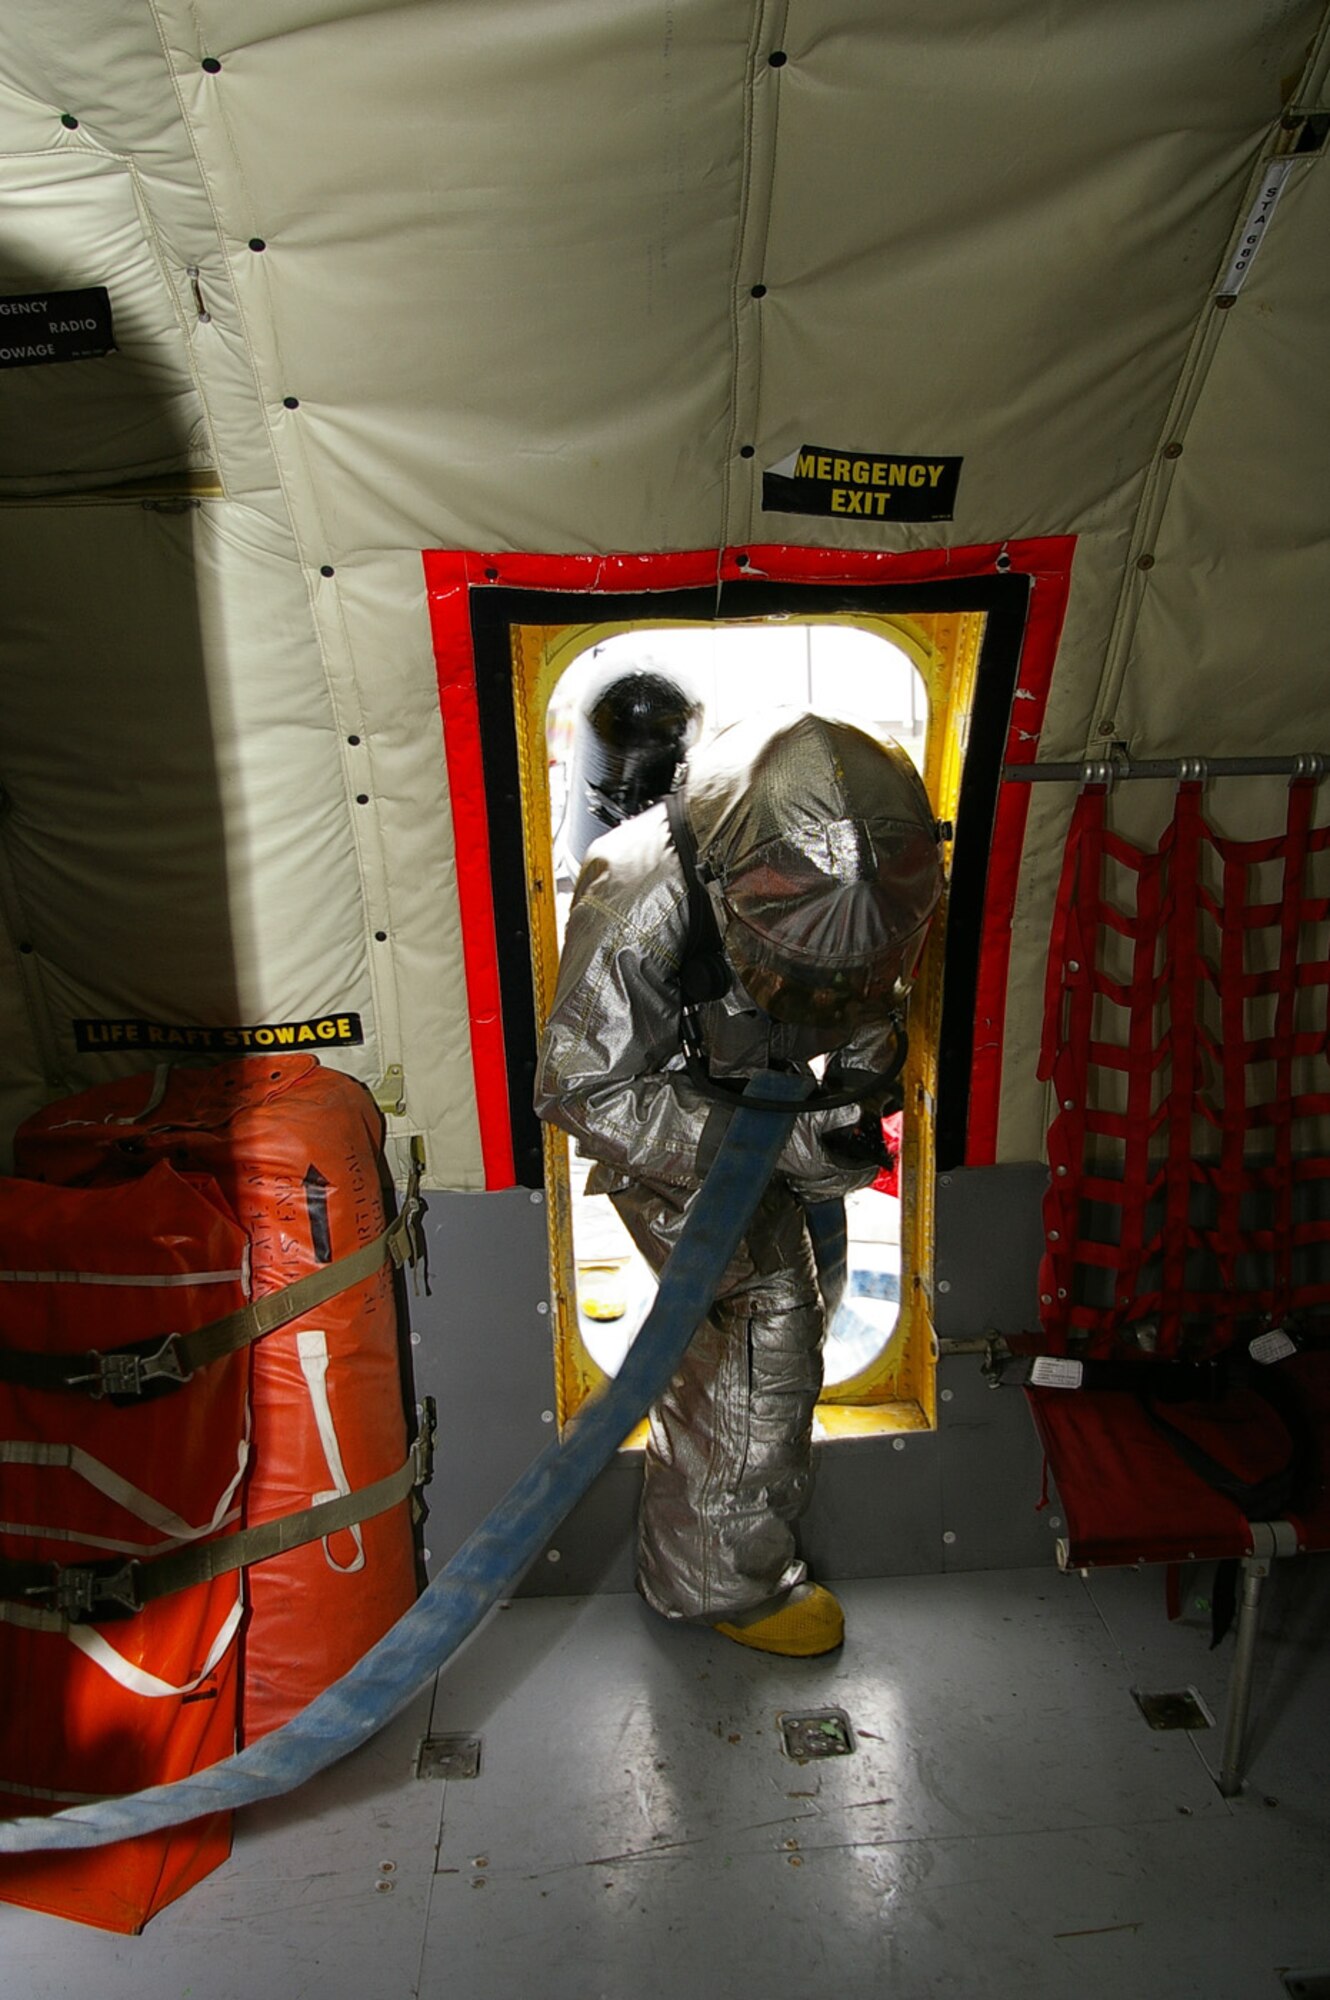 Staff Sgt. Marcus Modey, 100th Civil Engineer Fire Department, leads a team of four firefighters inside a KC-135 Stratotanker from a door above the wing, during an training exercise Nov. 13 at RAF Mildenhall. The firefighters entered the aircraft, which had a simulated engine fire, to search for "unaccounted personnel." Hands-on training is performed quarterly by the fire department, to help keep firefighters familiar with the interior layout of the aircraft and proper shut-down procedures. It also prepares them for different situations they could encounter with this type of emergency. (U.S. Air Force photo by Karen Abeyasekere)